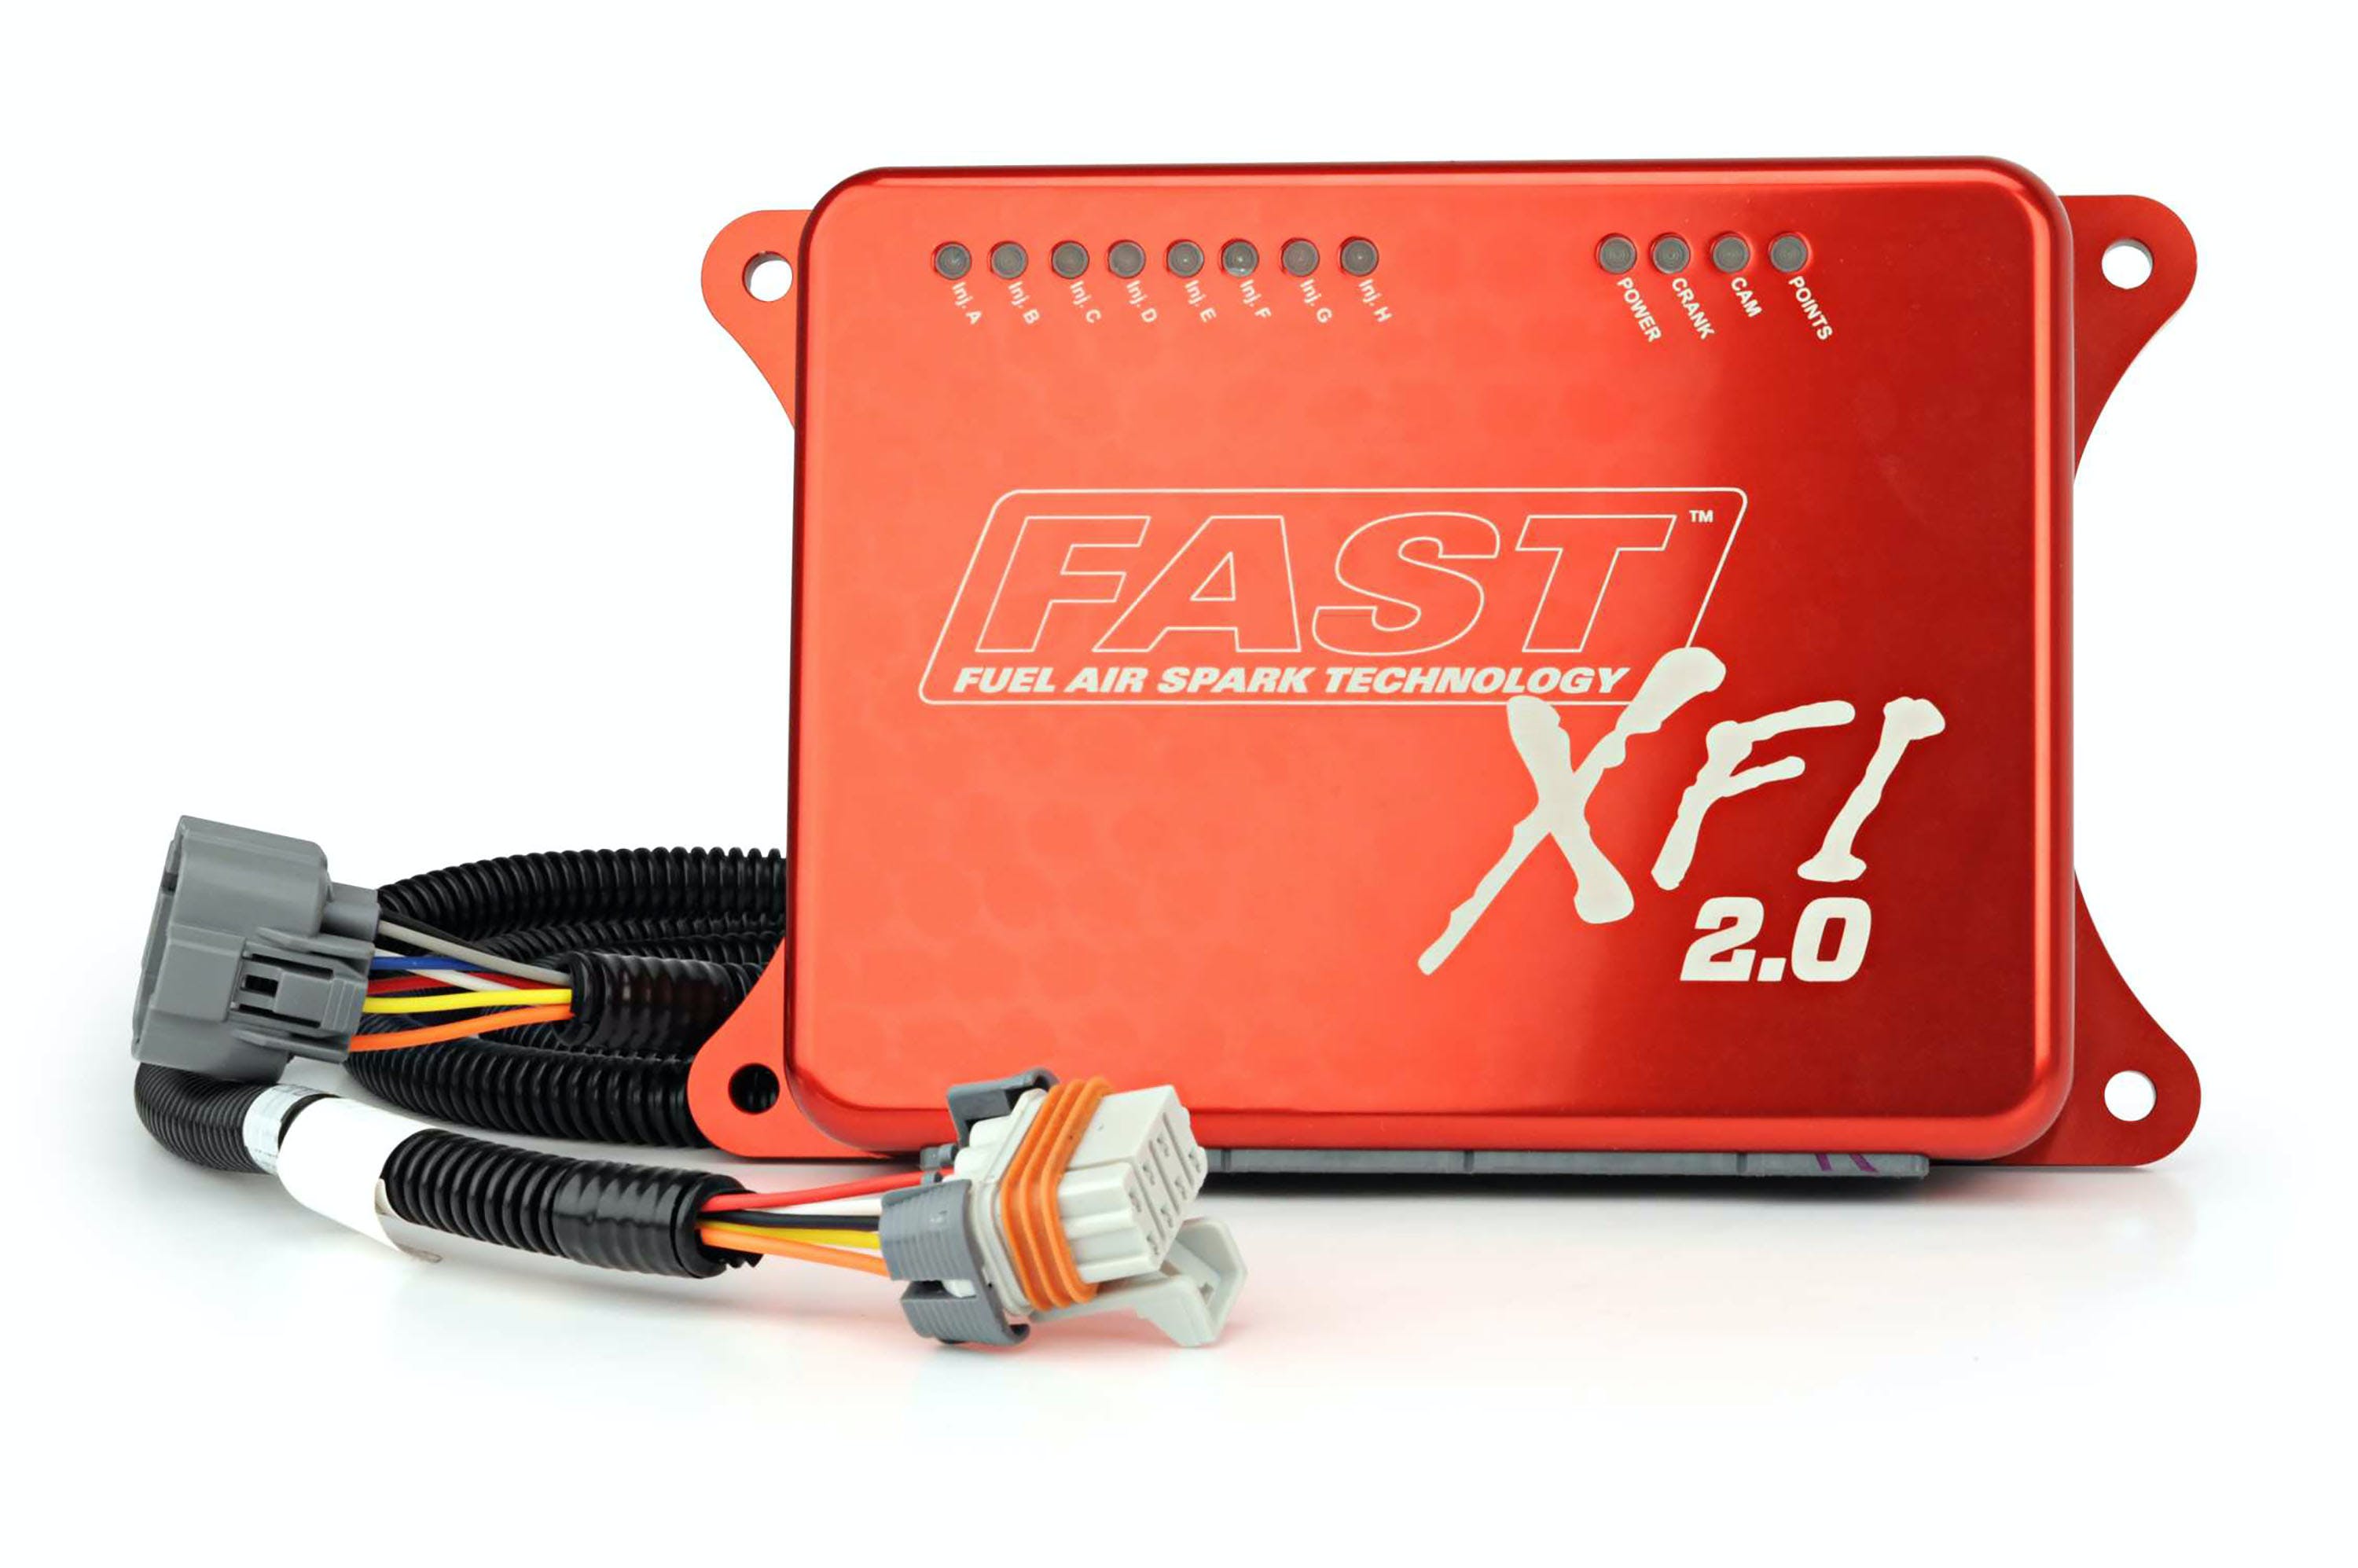 FAST - Fuel Air Spark Technology 301001 XFI 2.0 ECU Kit W/ Y Adapter for 16 Injector Applications